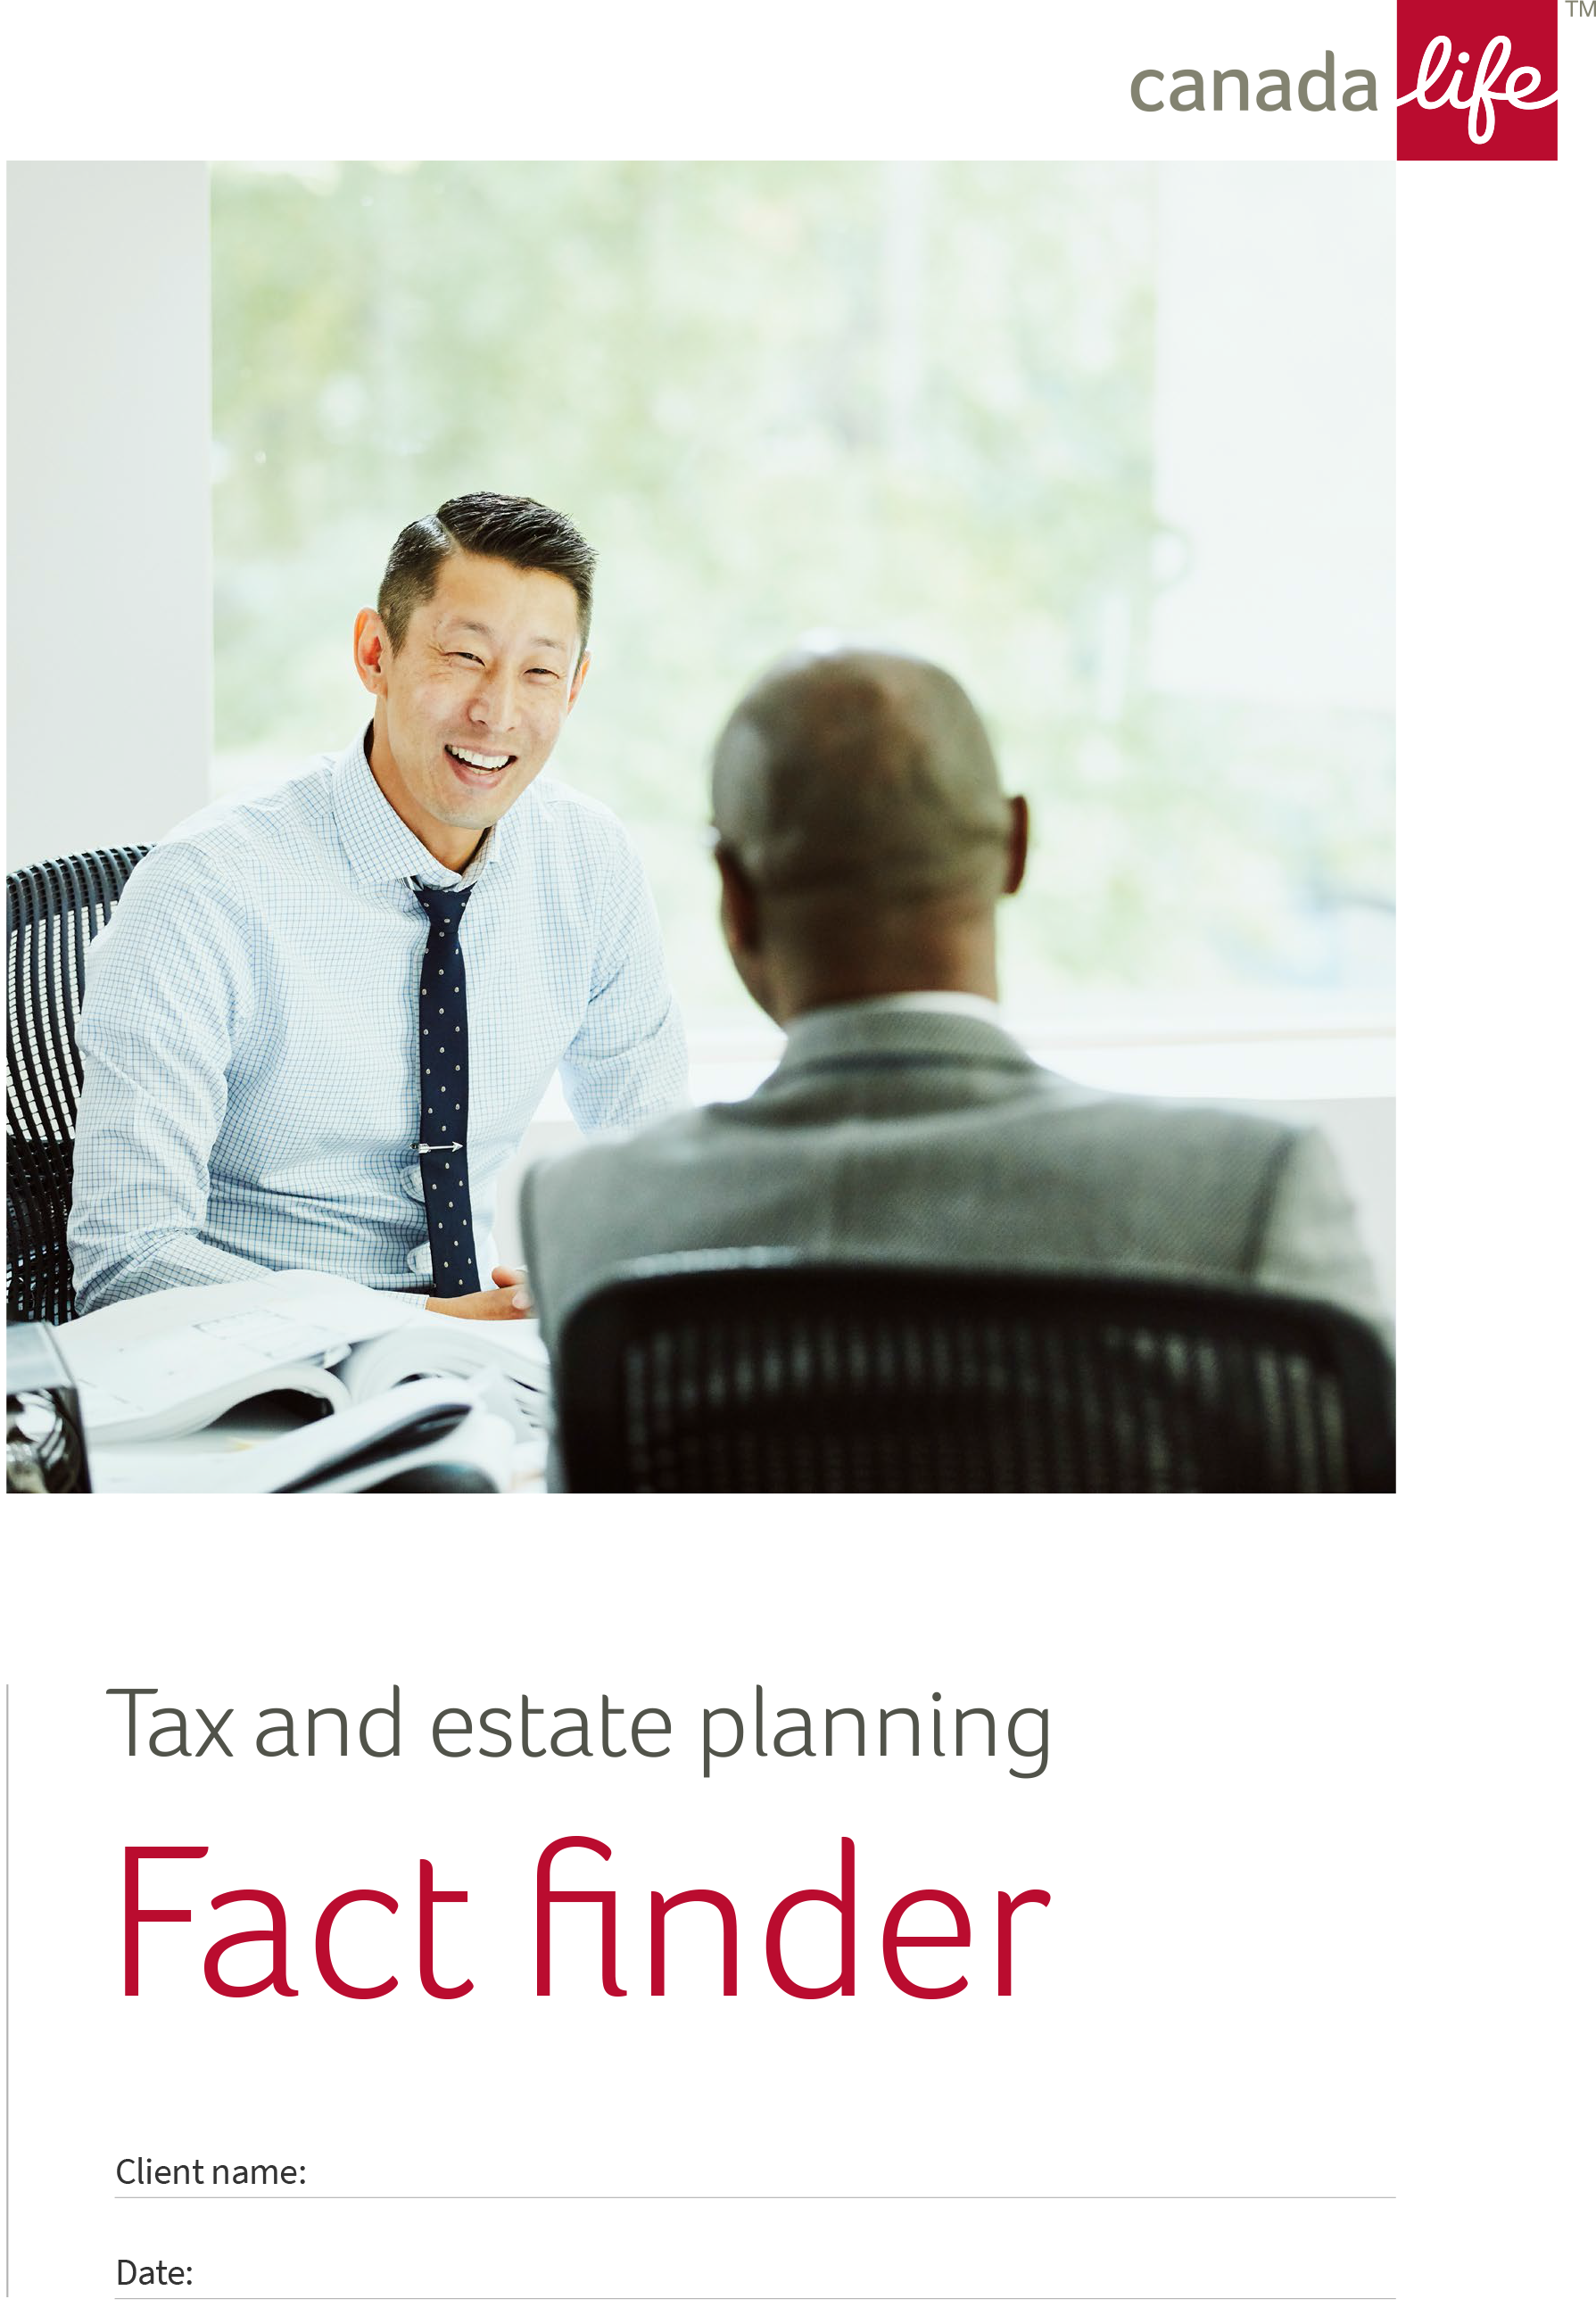 Tax and estate planning fact finder image